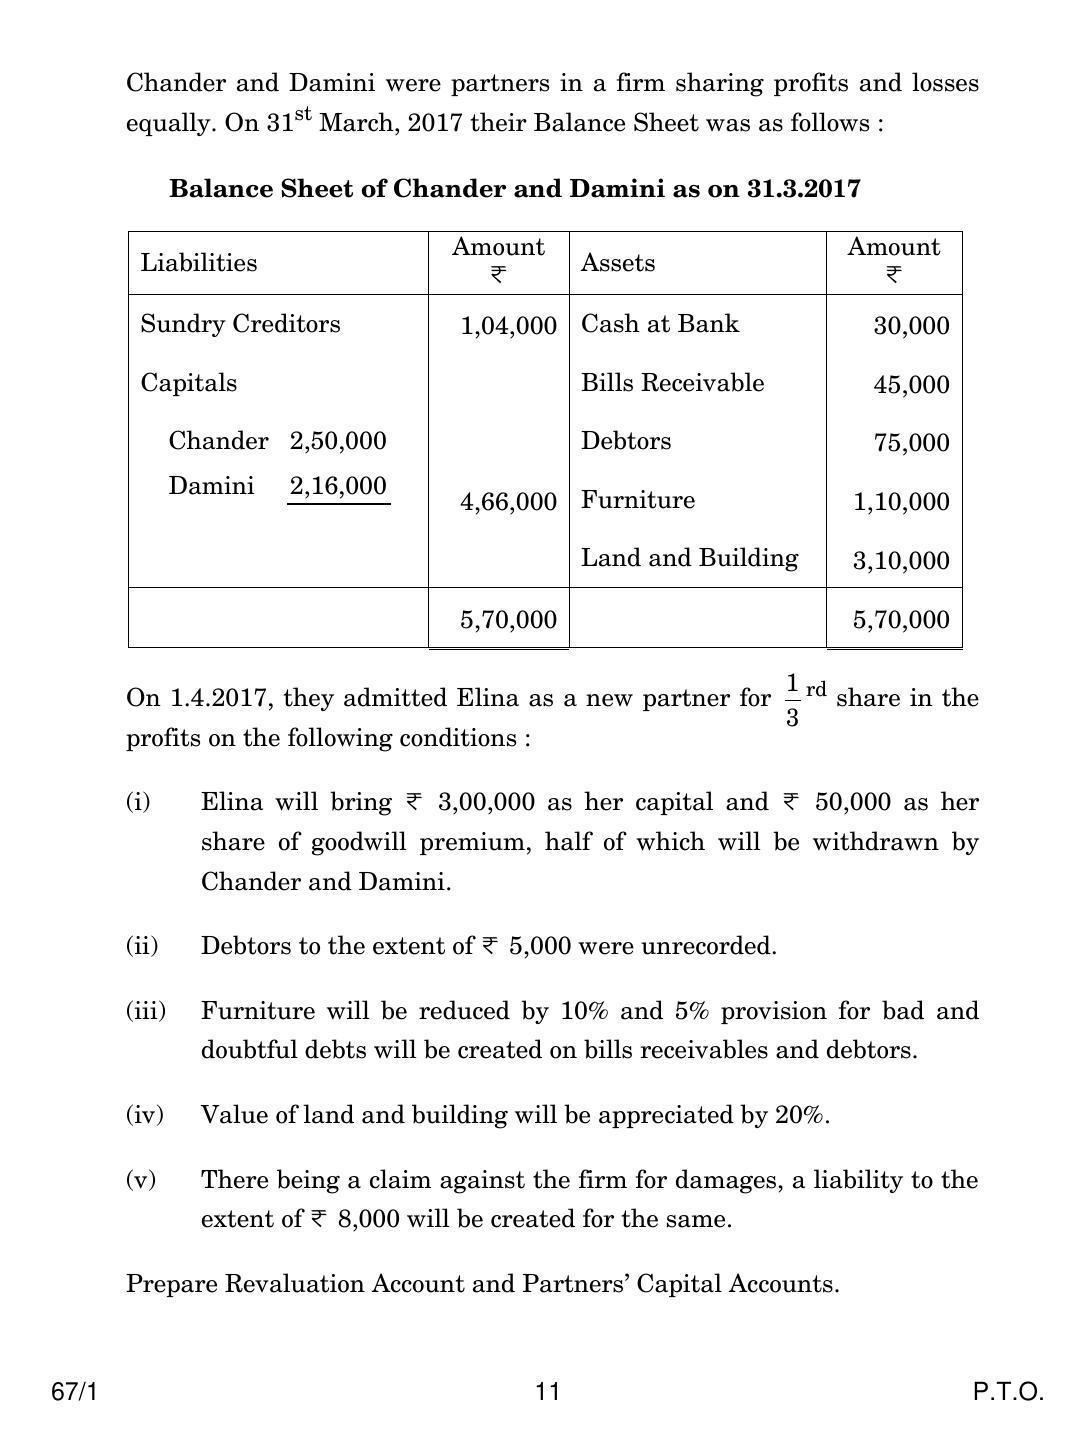 CBSE Class 12 67-1 ACCOUNTANCY 2018 Question Paper - Page 11